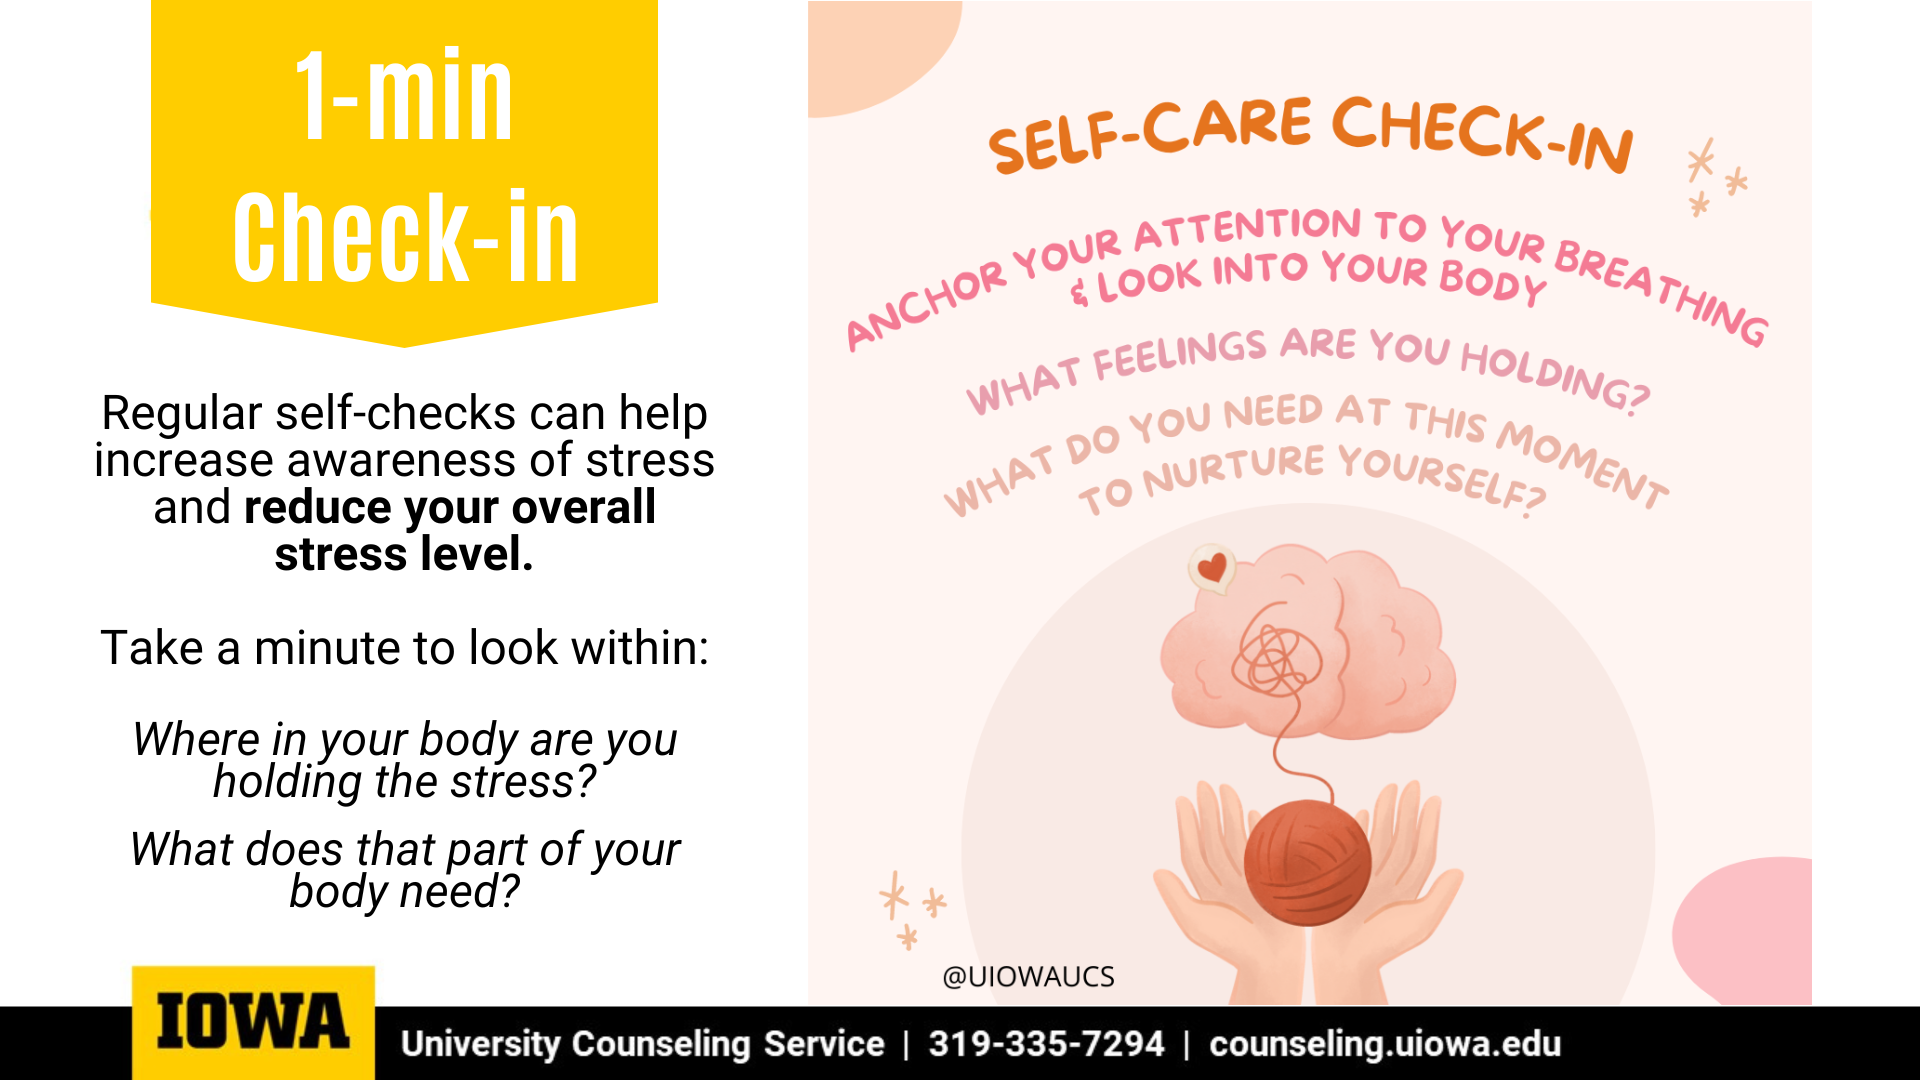 University Counseling Service - Self-Care Check-In